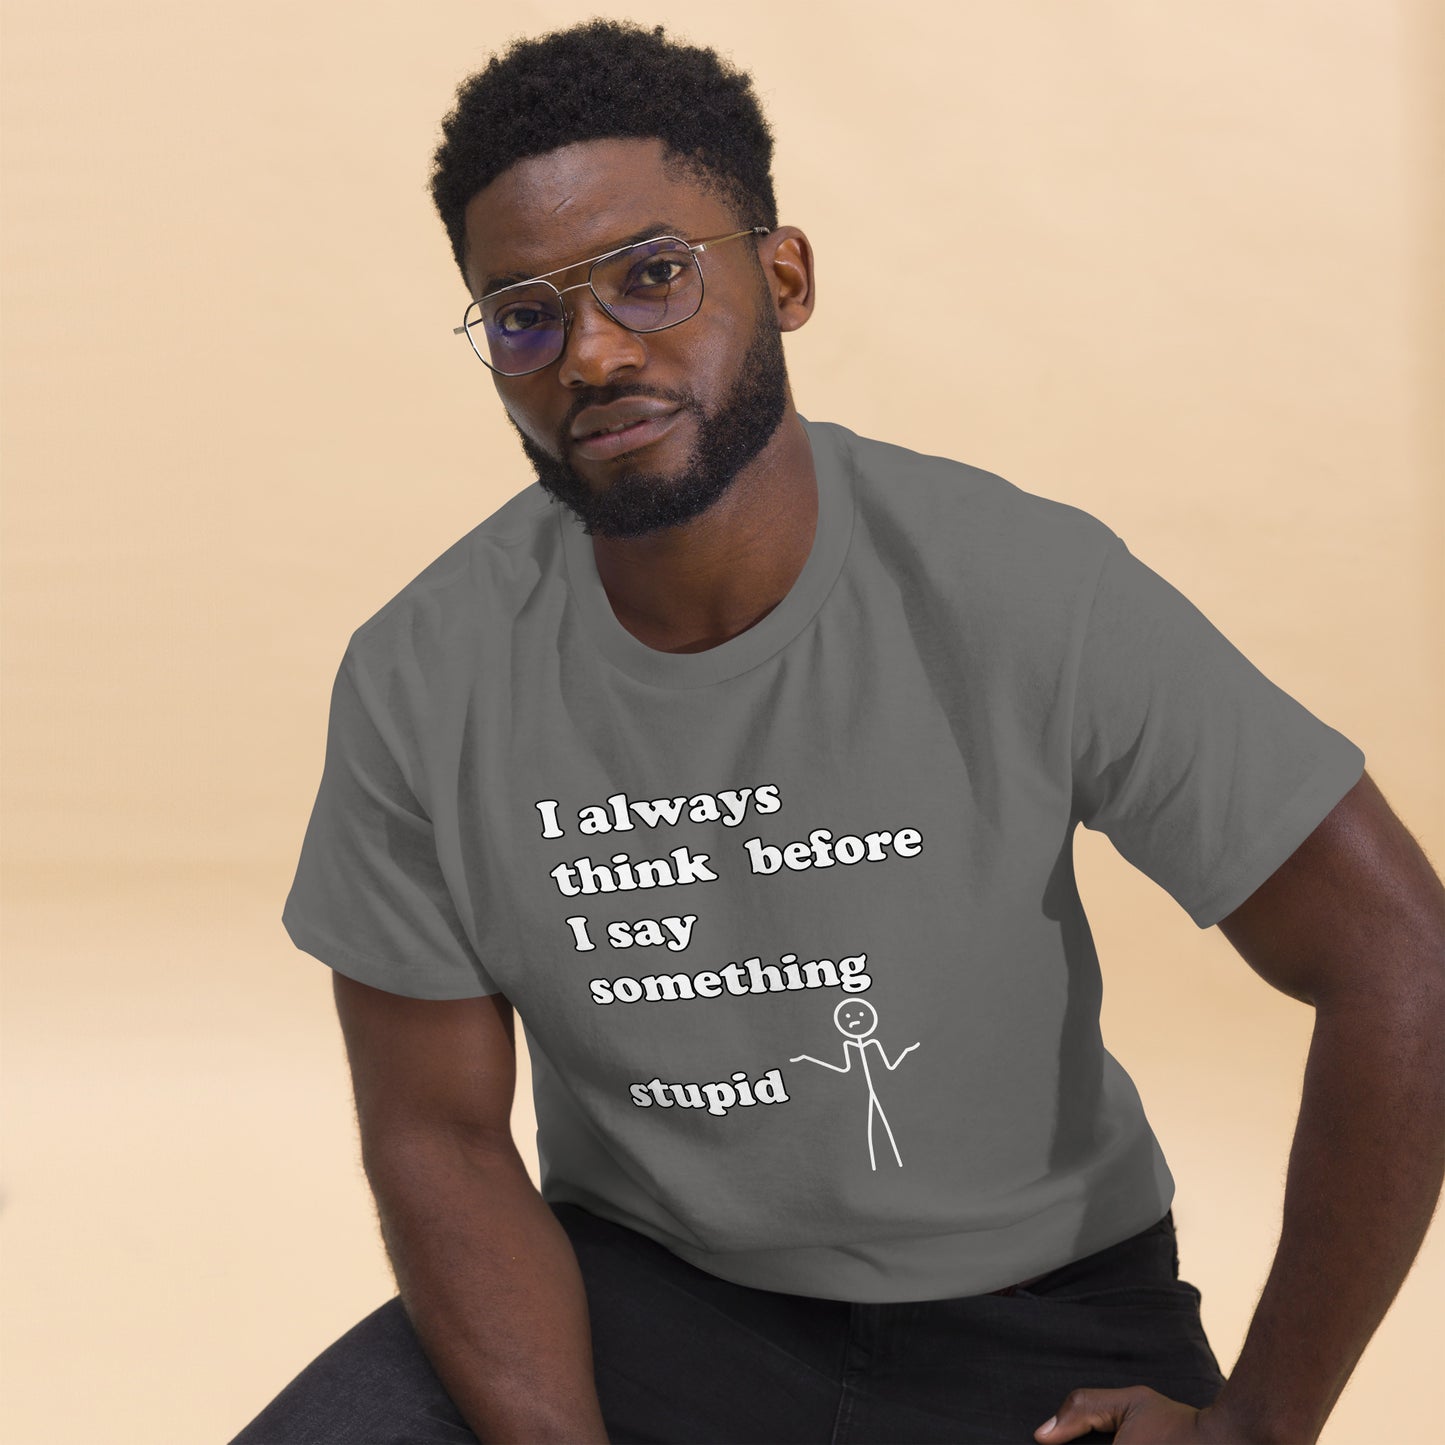 Man with grey t-shirt with text "I always think before I say something stupid"